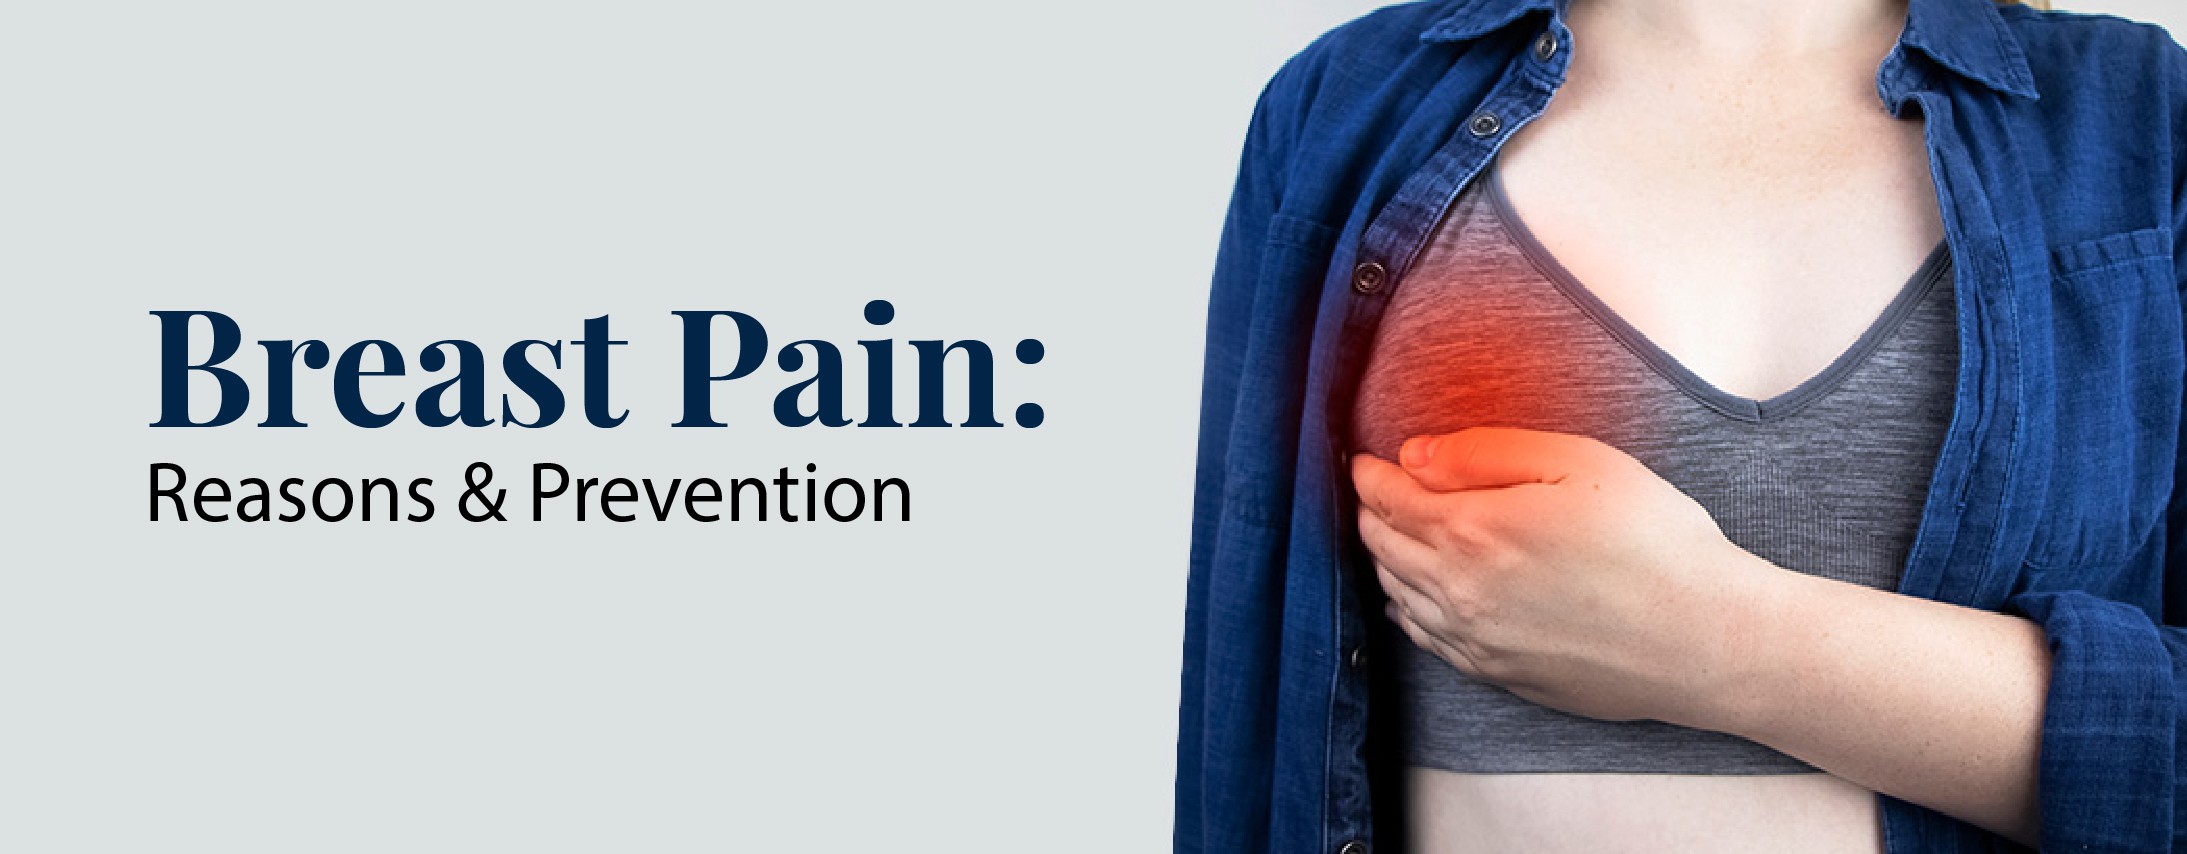 Breast Pain: Reasons and Prevention